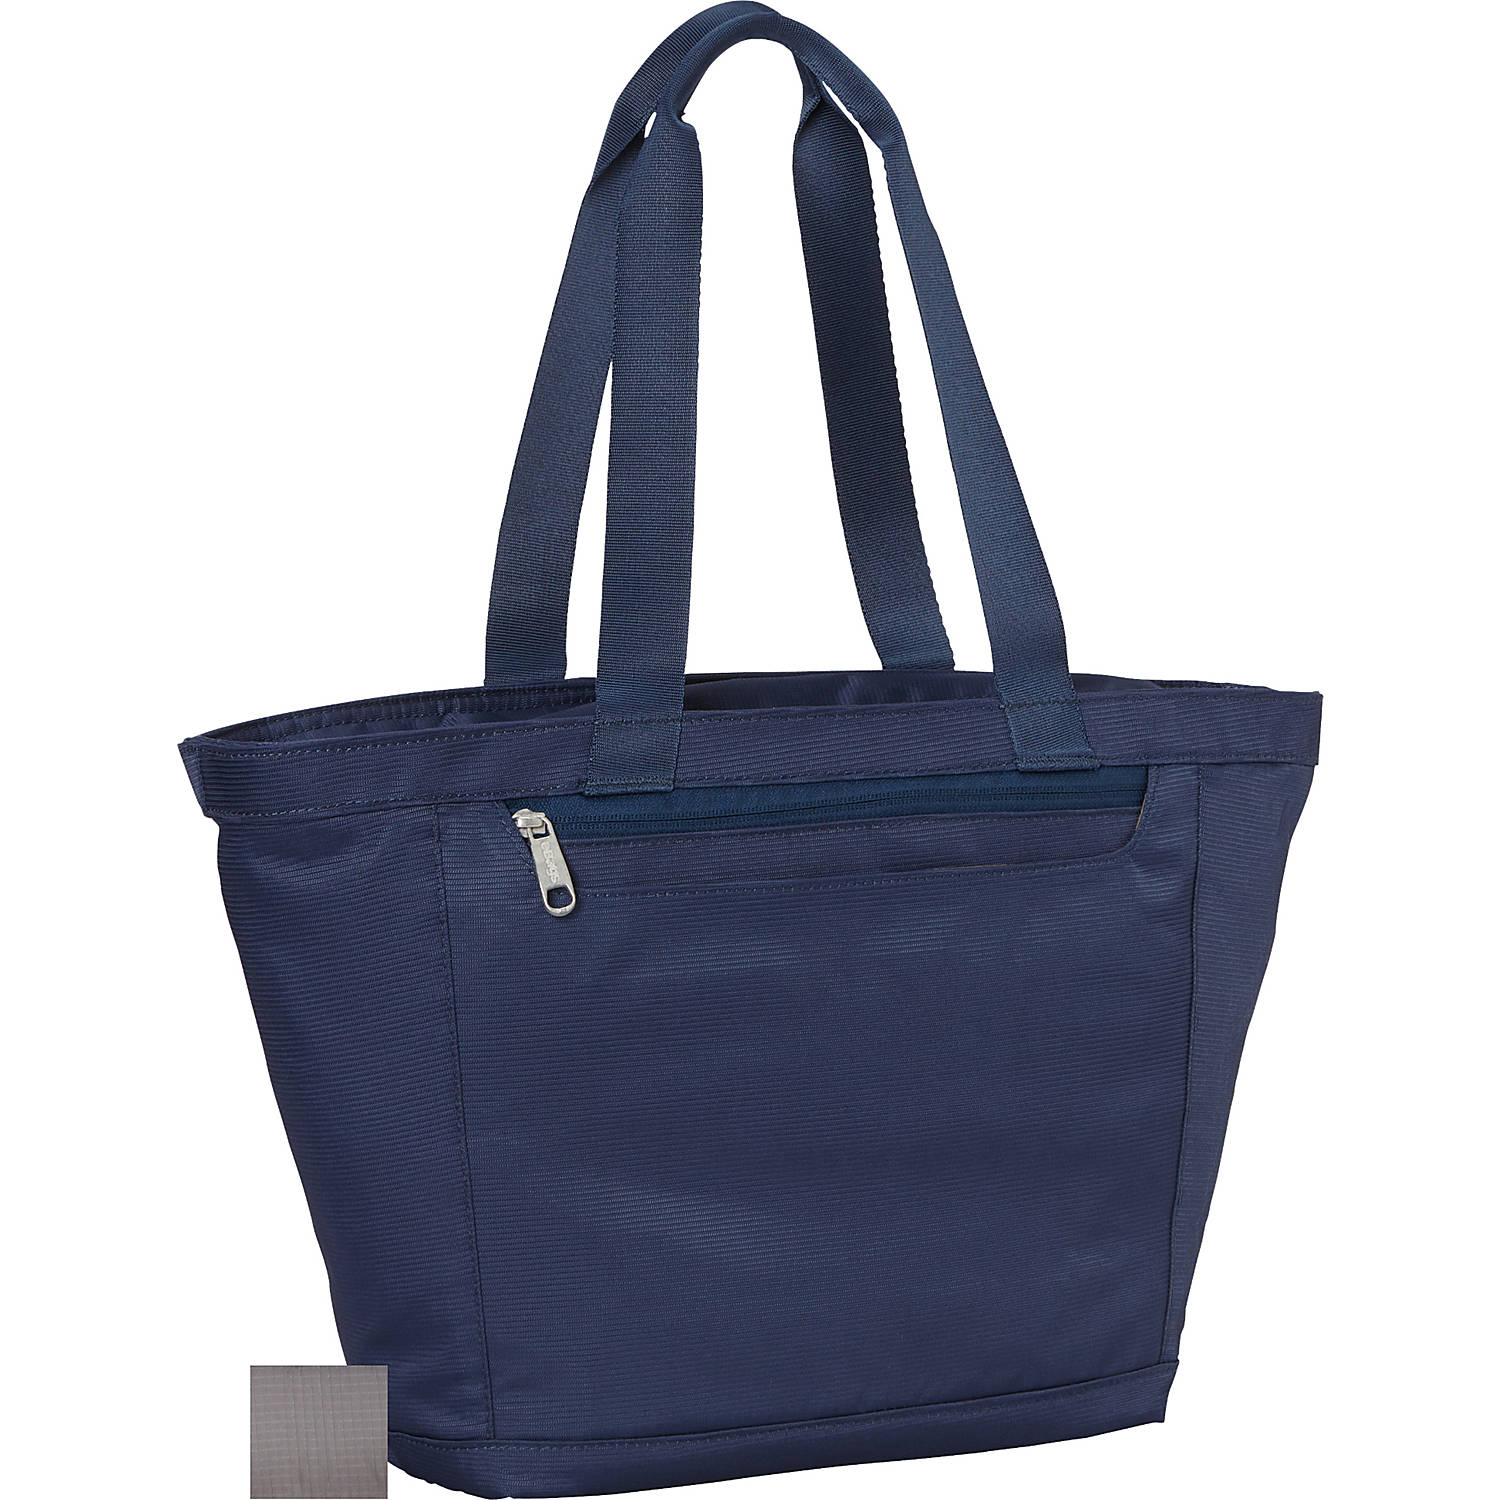 Metro Tote with RFID security for $21 - Clark Deals